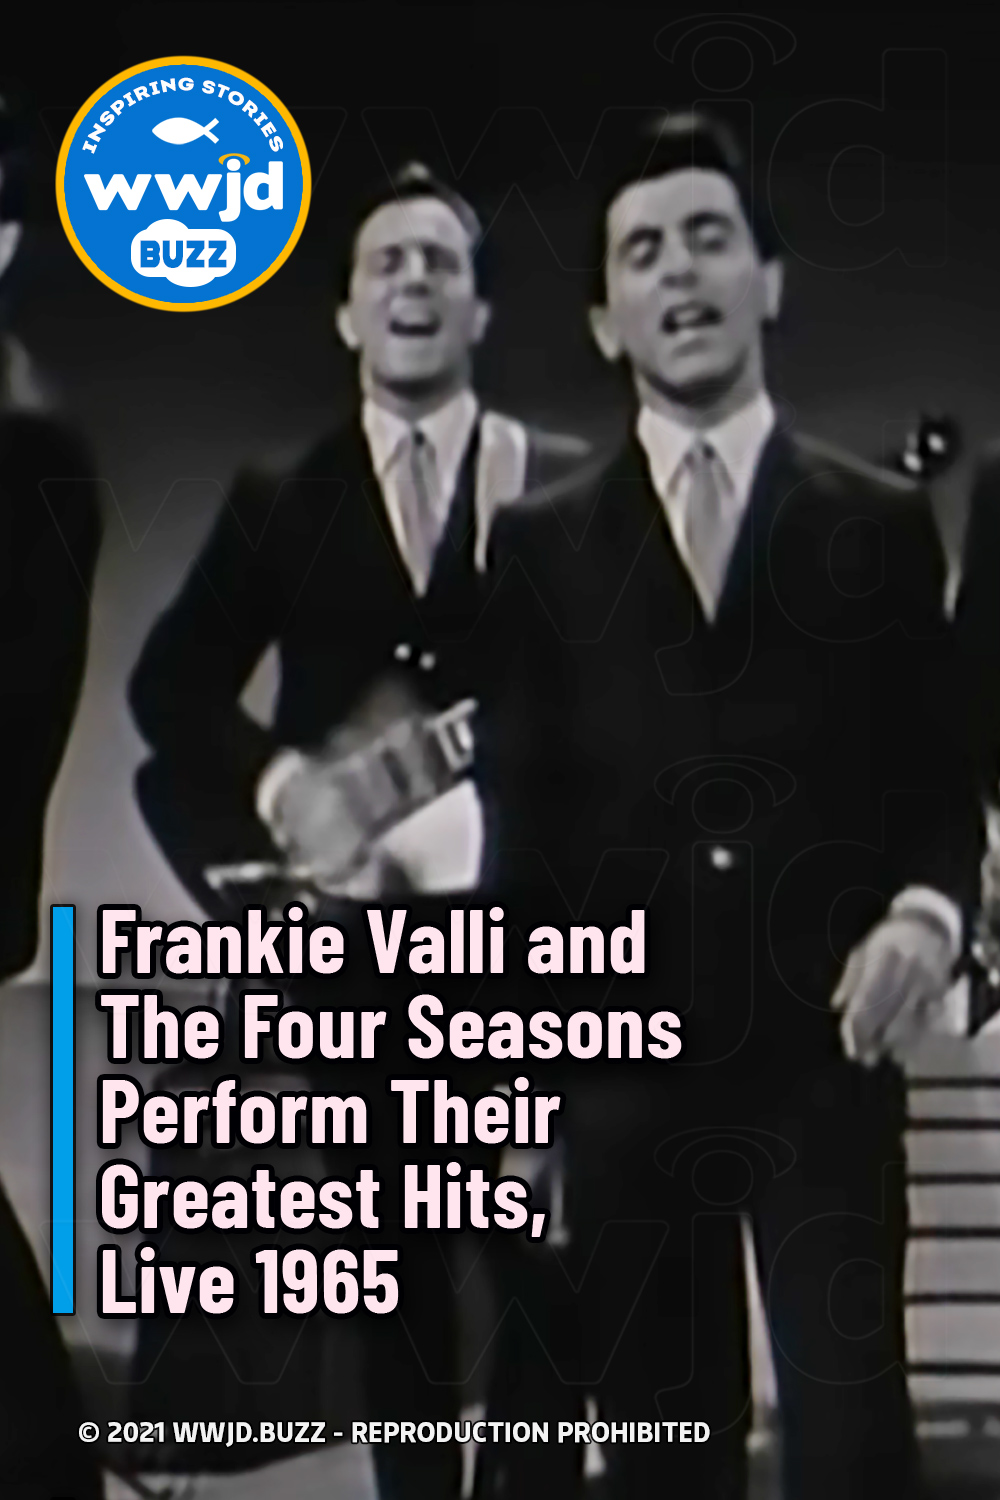 Frankie Valli and The Four Seasons Perform Their Greatest Hits, Live 1965